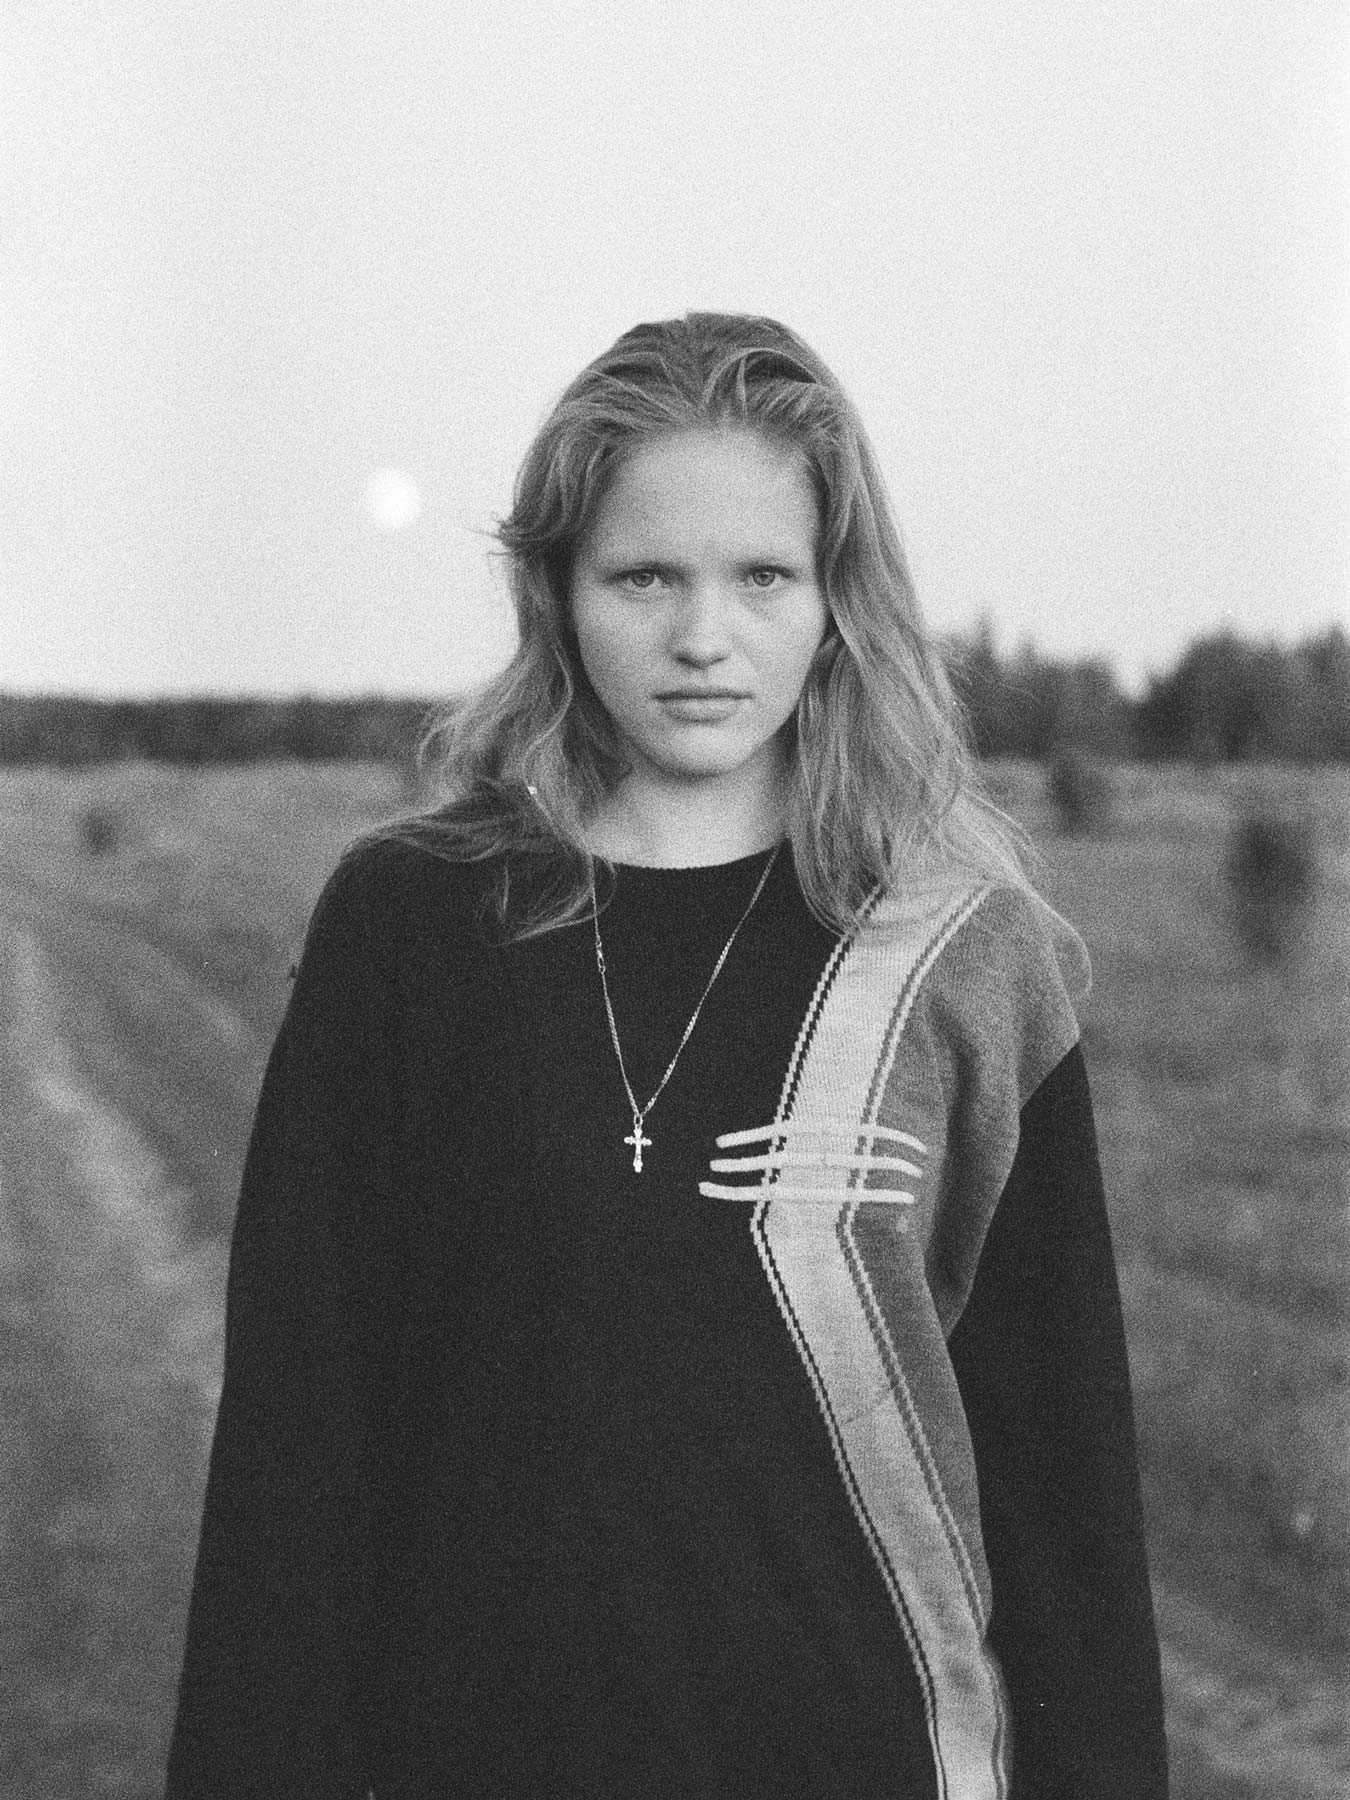 <p>This portrait of Irina in Kargaleyka village is part of Masha Demianova’s long-term project “Hometown”, an exploration of Russian beauty, femininity, belonging, and landscape. The photographer travelled to different remote locations in Russia to document her friends’ and<br>
 models’ hometowns.</p>